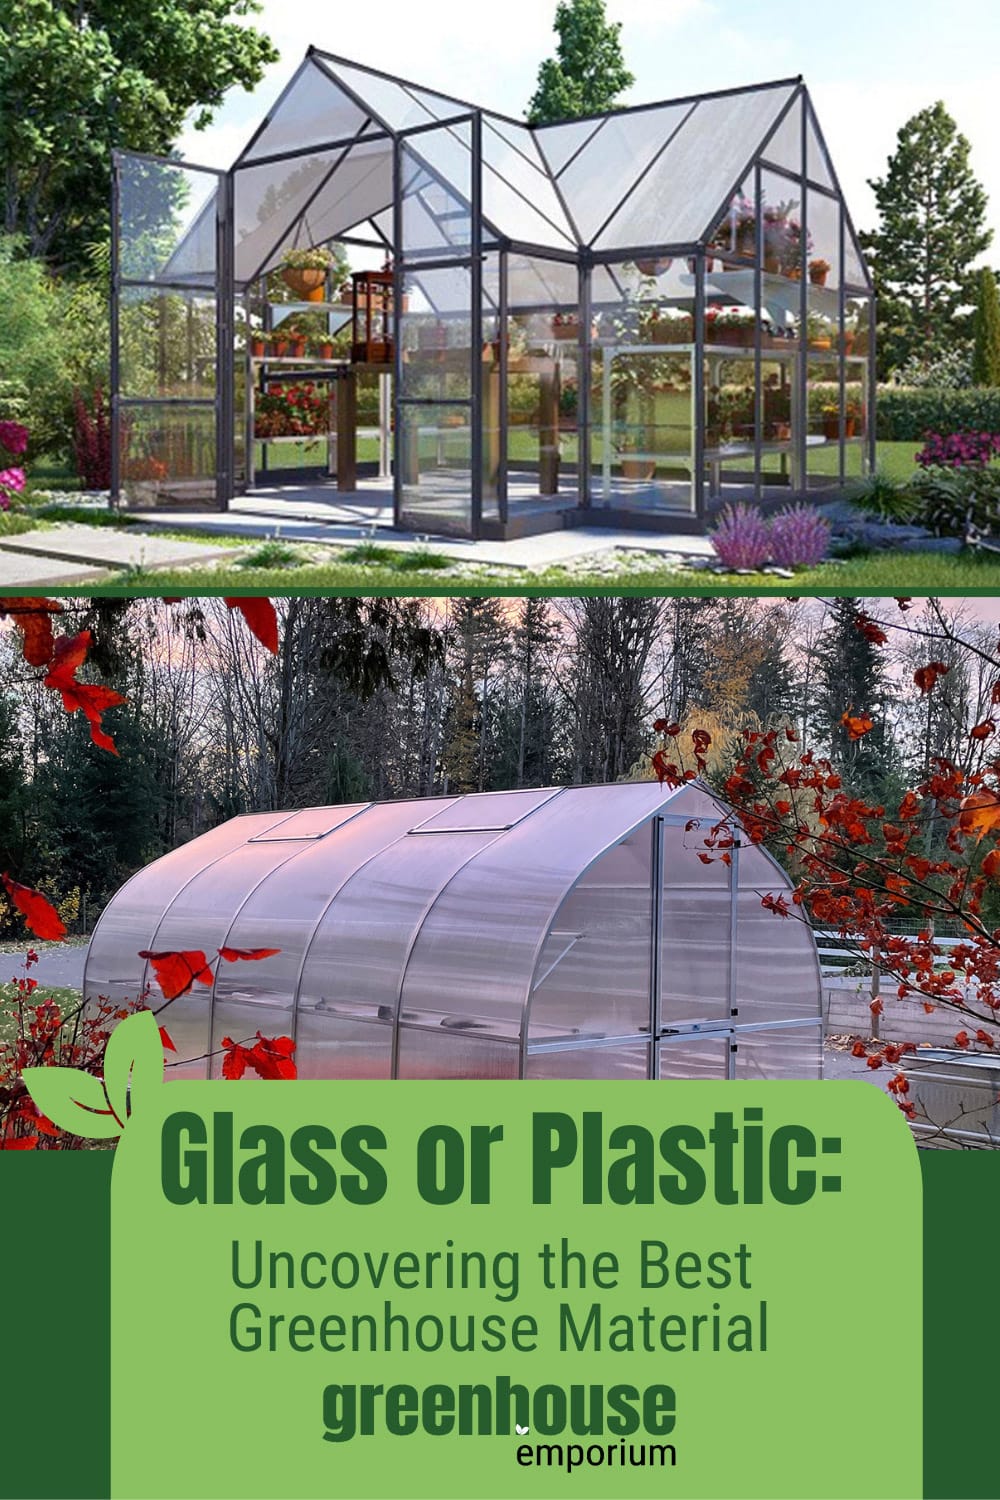 Upper image exterior view of glass greenhouse, lower image plastic greenhouse with text: Glass or Plastic: Uncovering the Best Greenhouse Material